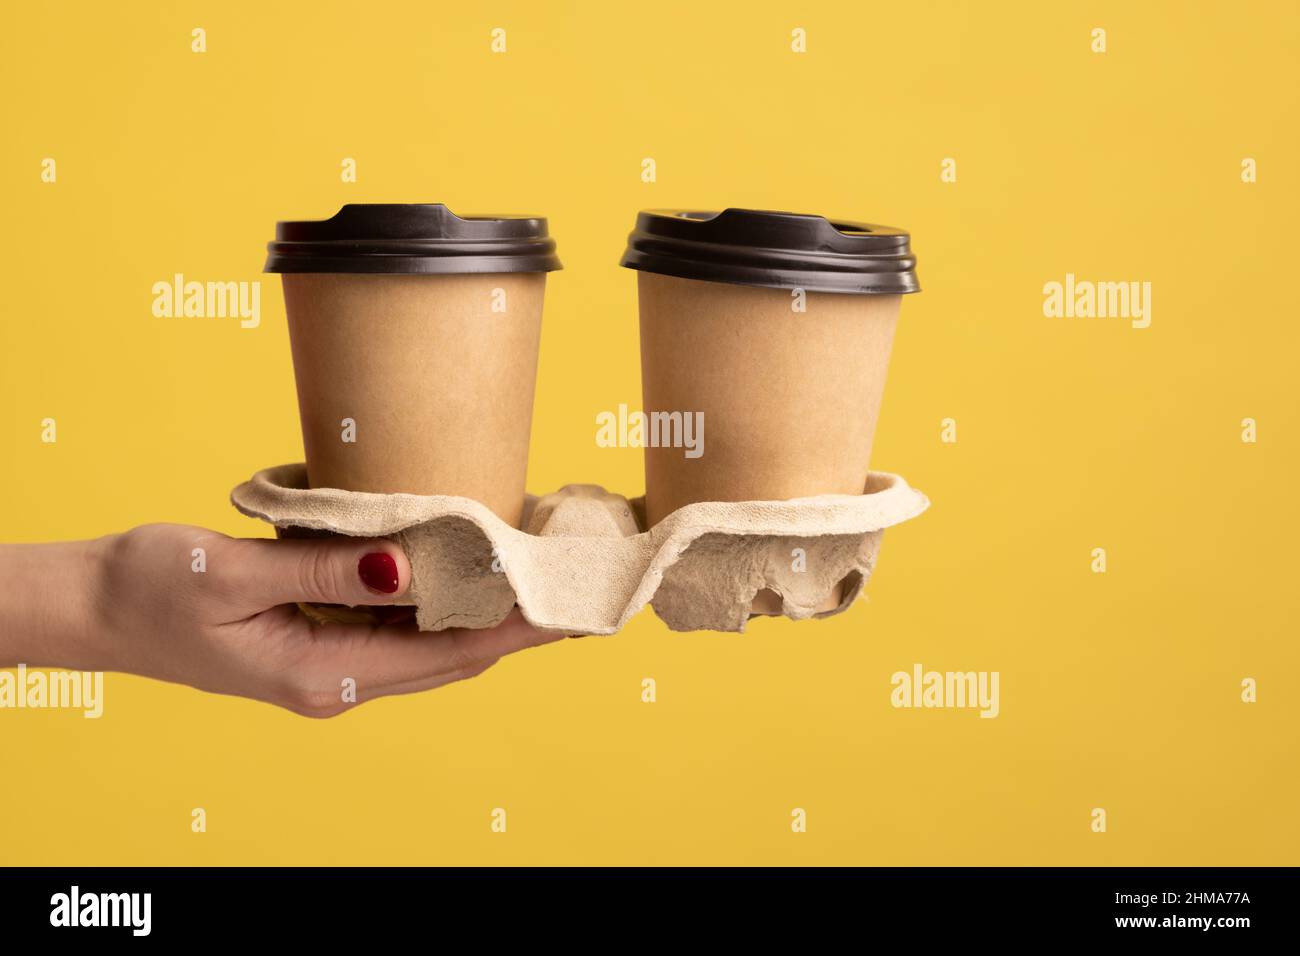 Profile side view closeup of woman hand holding and showing cup of hot takeaway mug drink in hand, coffee break at work. Indoor studio shot isolated on yellow background. Stock Photo